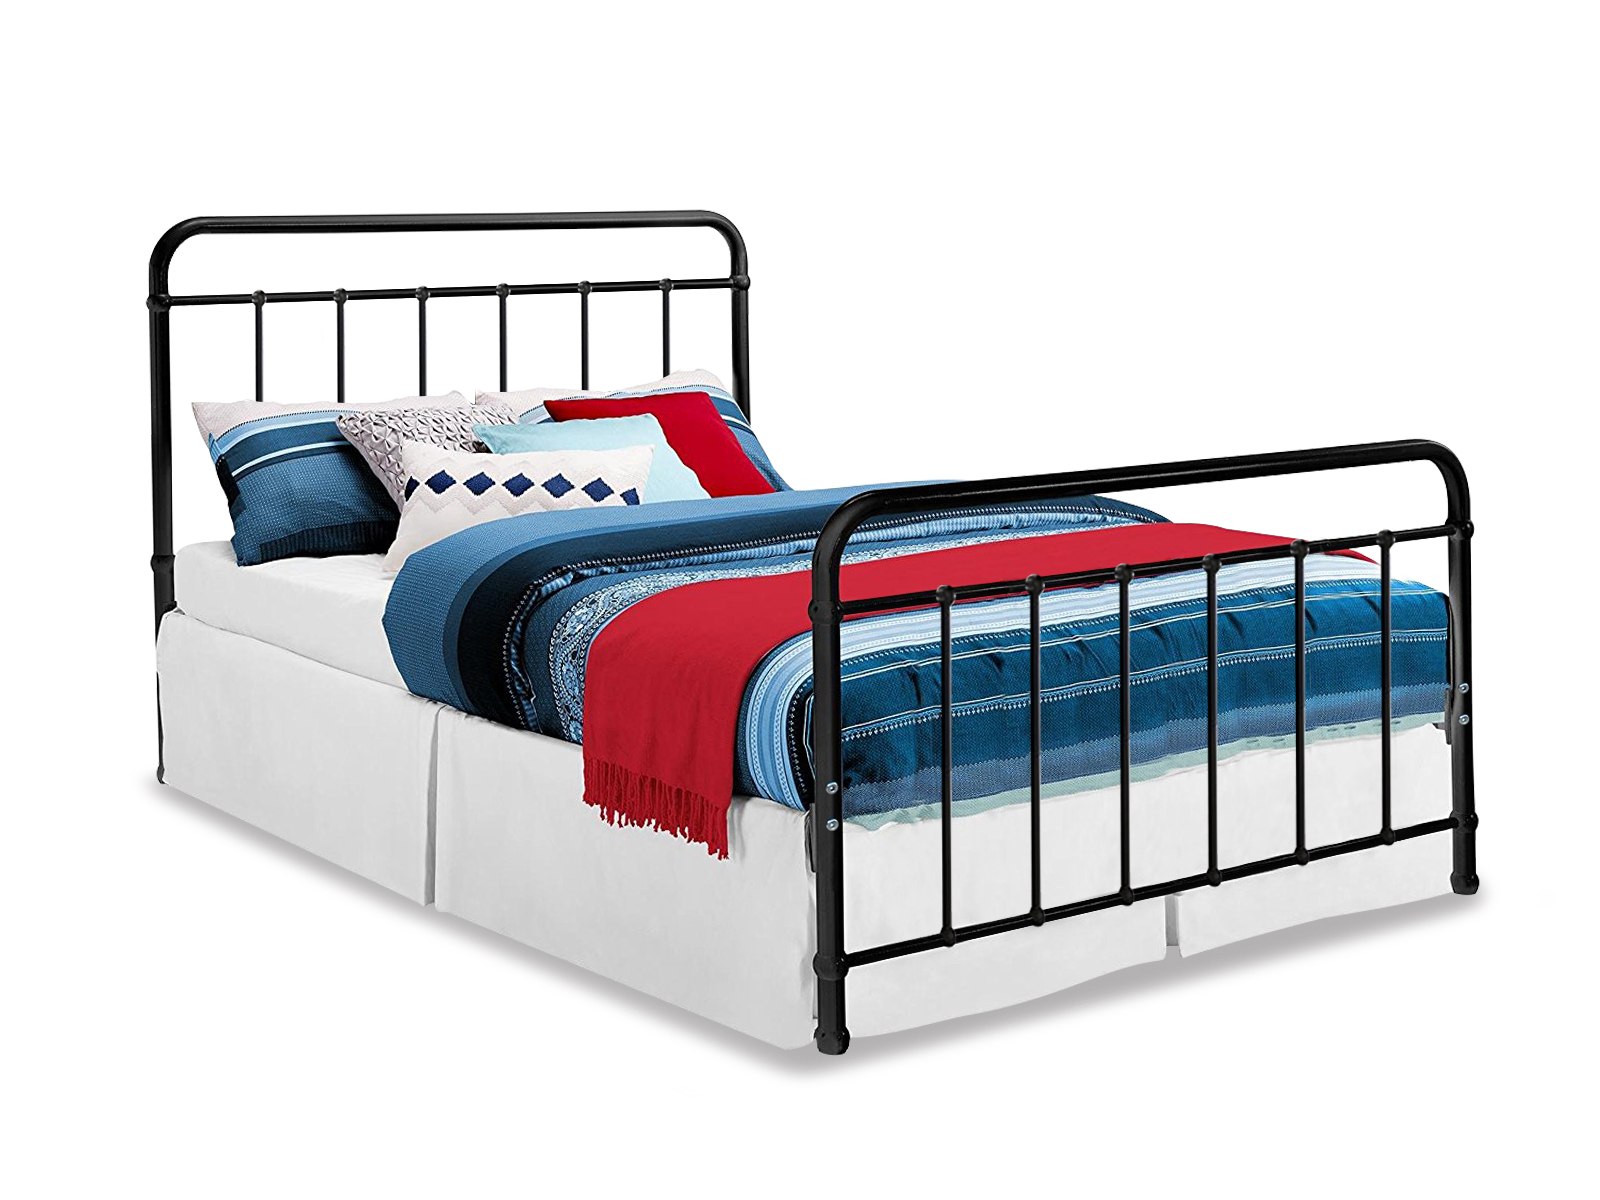 Darcy Double Metal Bed Frame